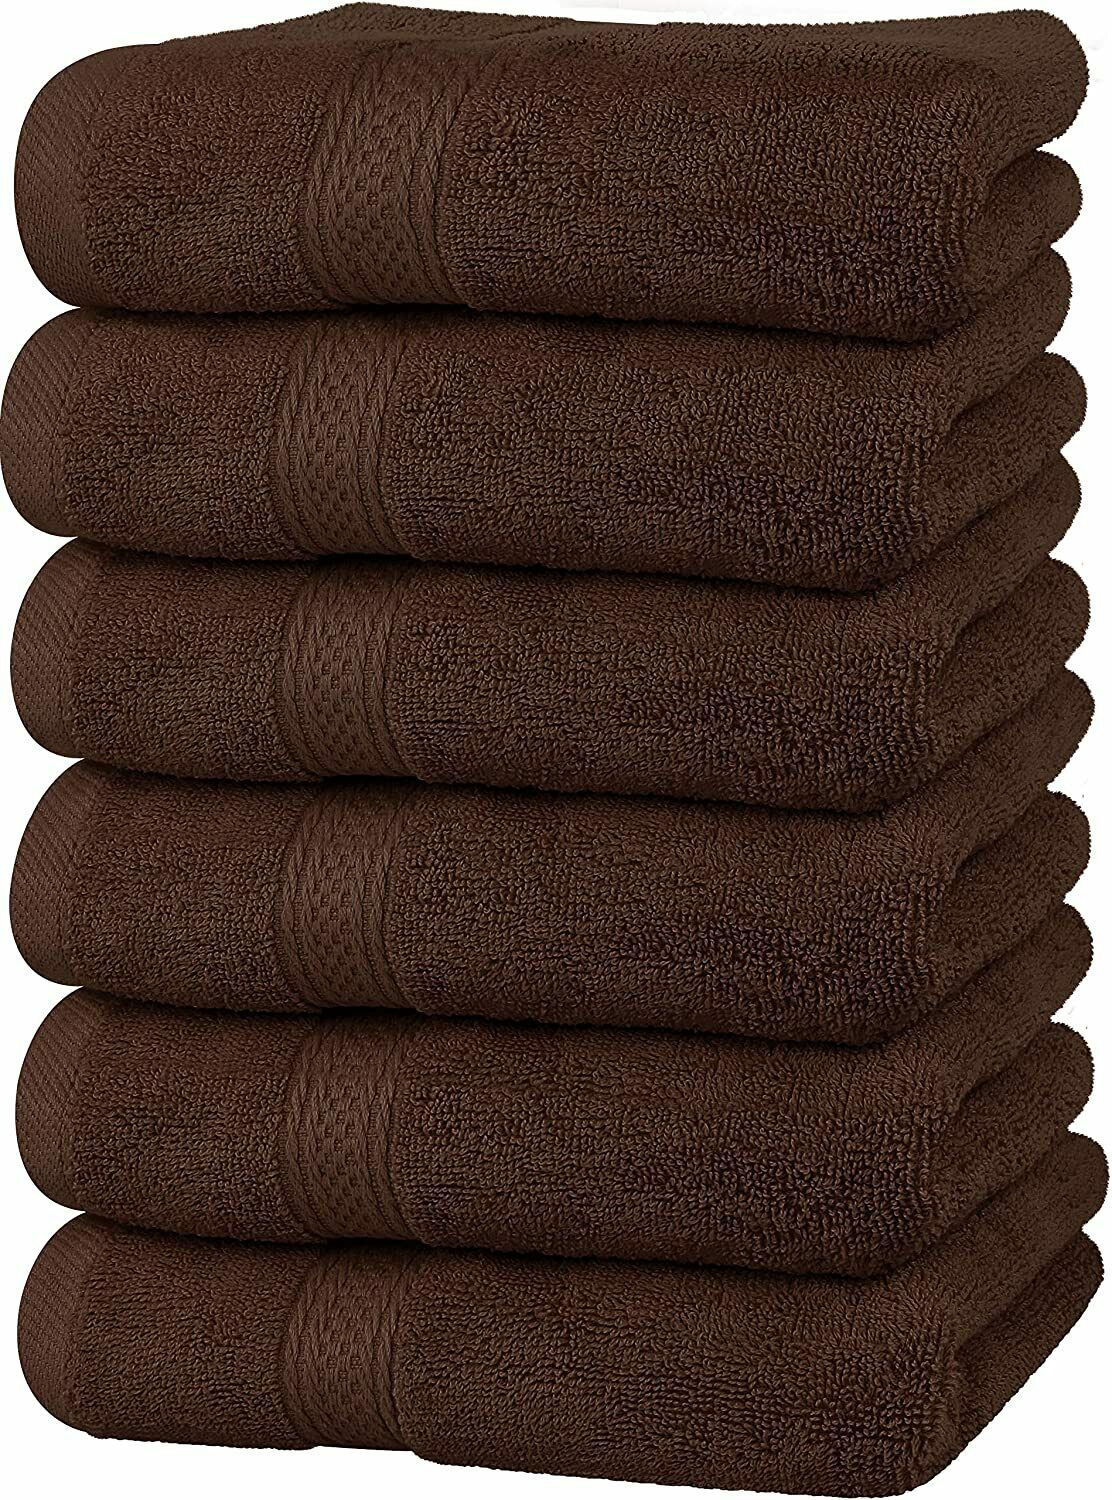 6 Pack Premium Hand Towels 16 X 28 Inches Ring Spun Cotton 600 Gsm Utopia Towels